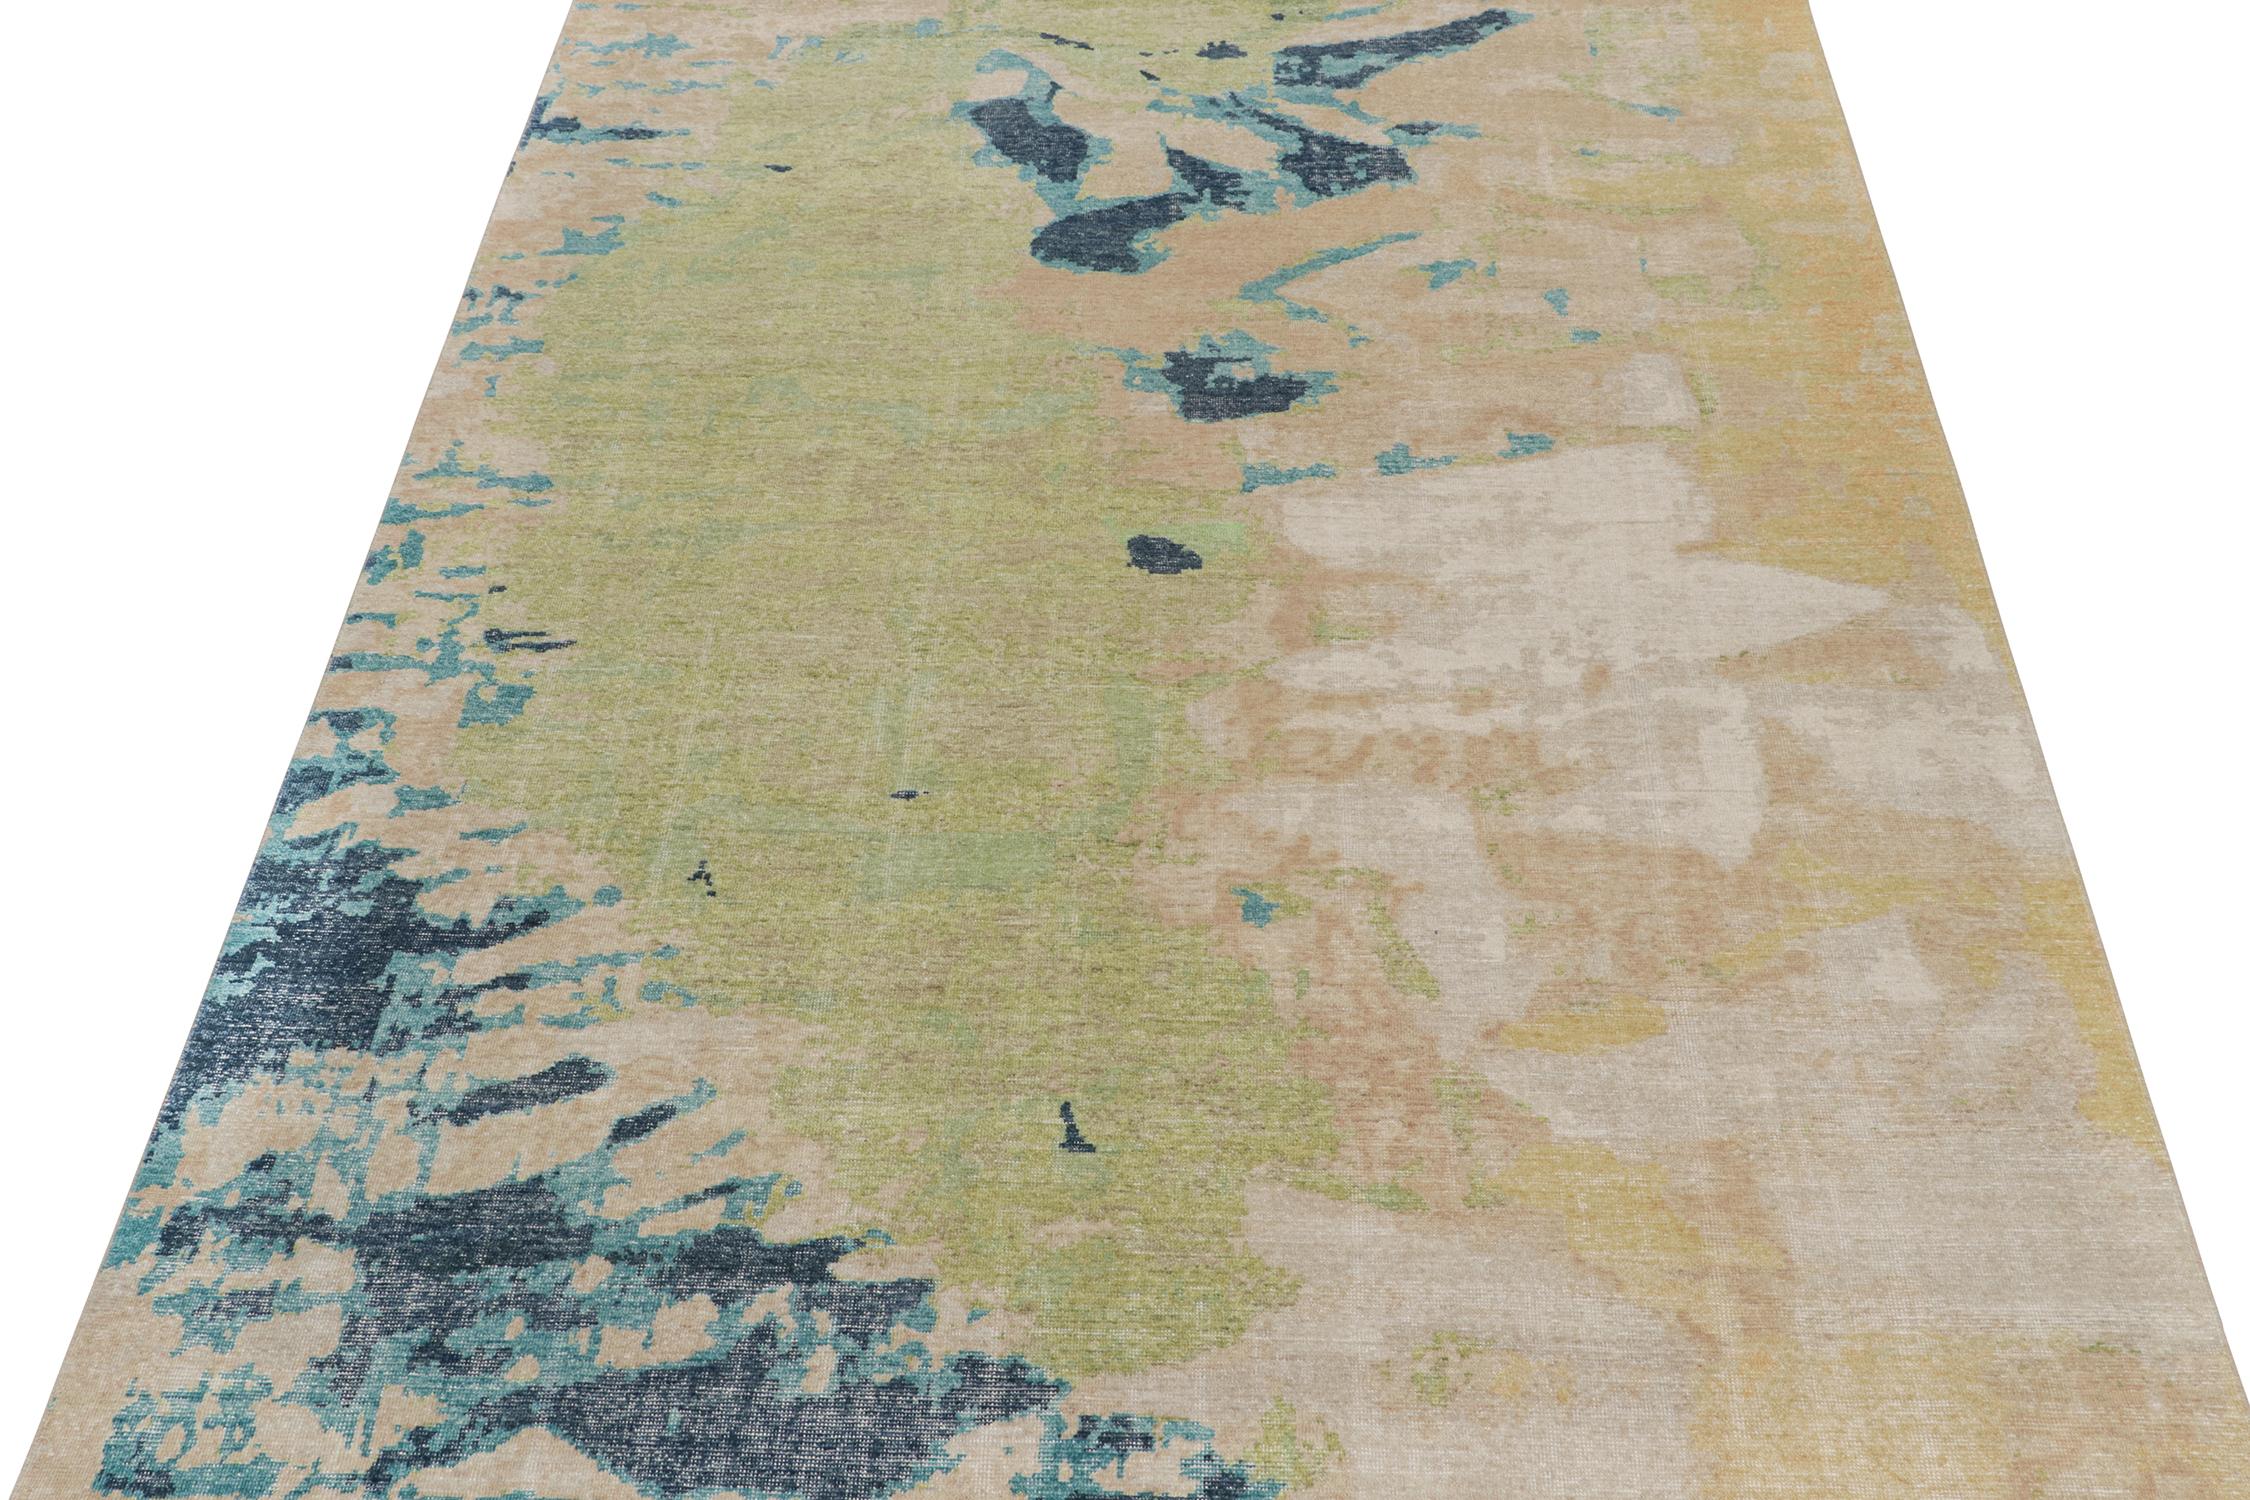 ??This contemporary 9x12 abstract rug is a new addition to the Homage Collection by Rug & Kilim.

Further On the Design:

Hand-knotted in wool and cotton, this design evokes a fluid play blue, green, beige, and gold paint strokes. Keen eyes